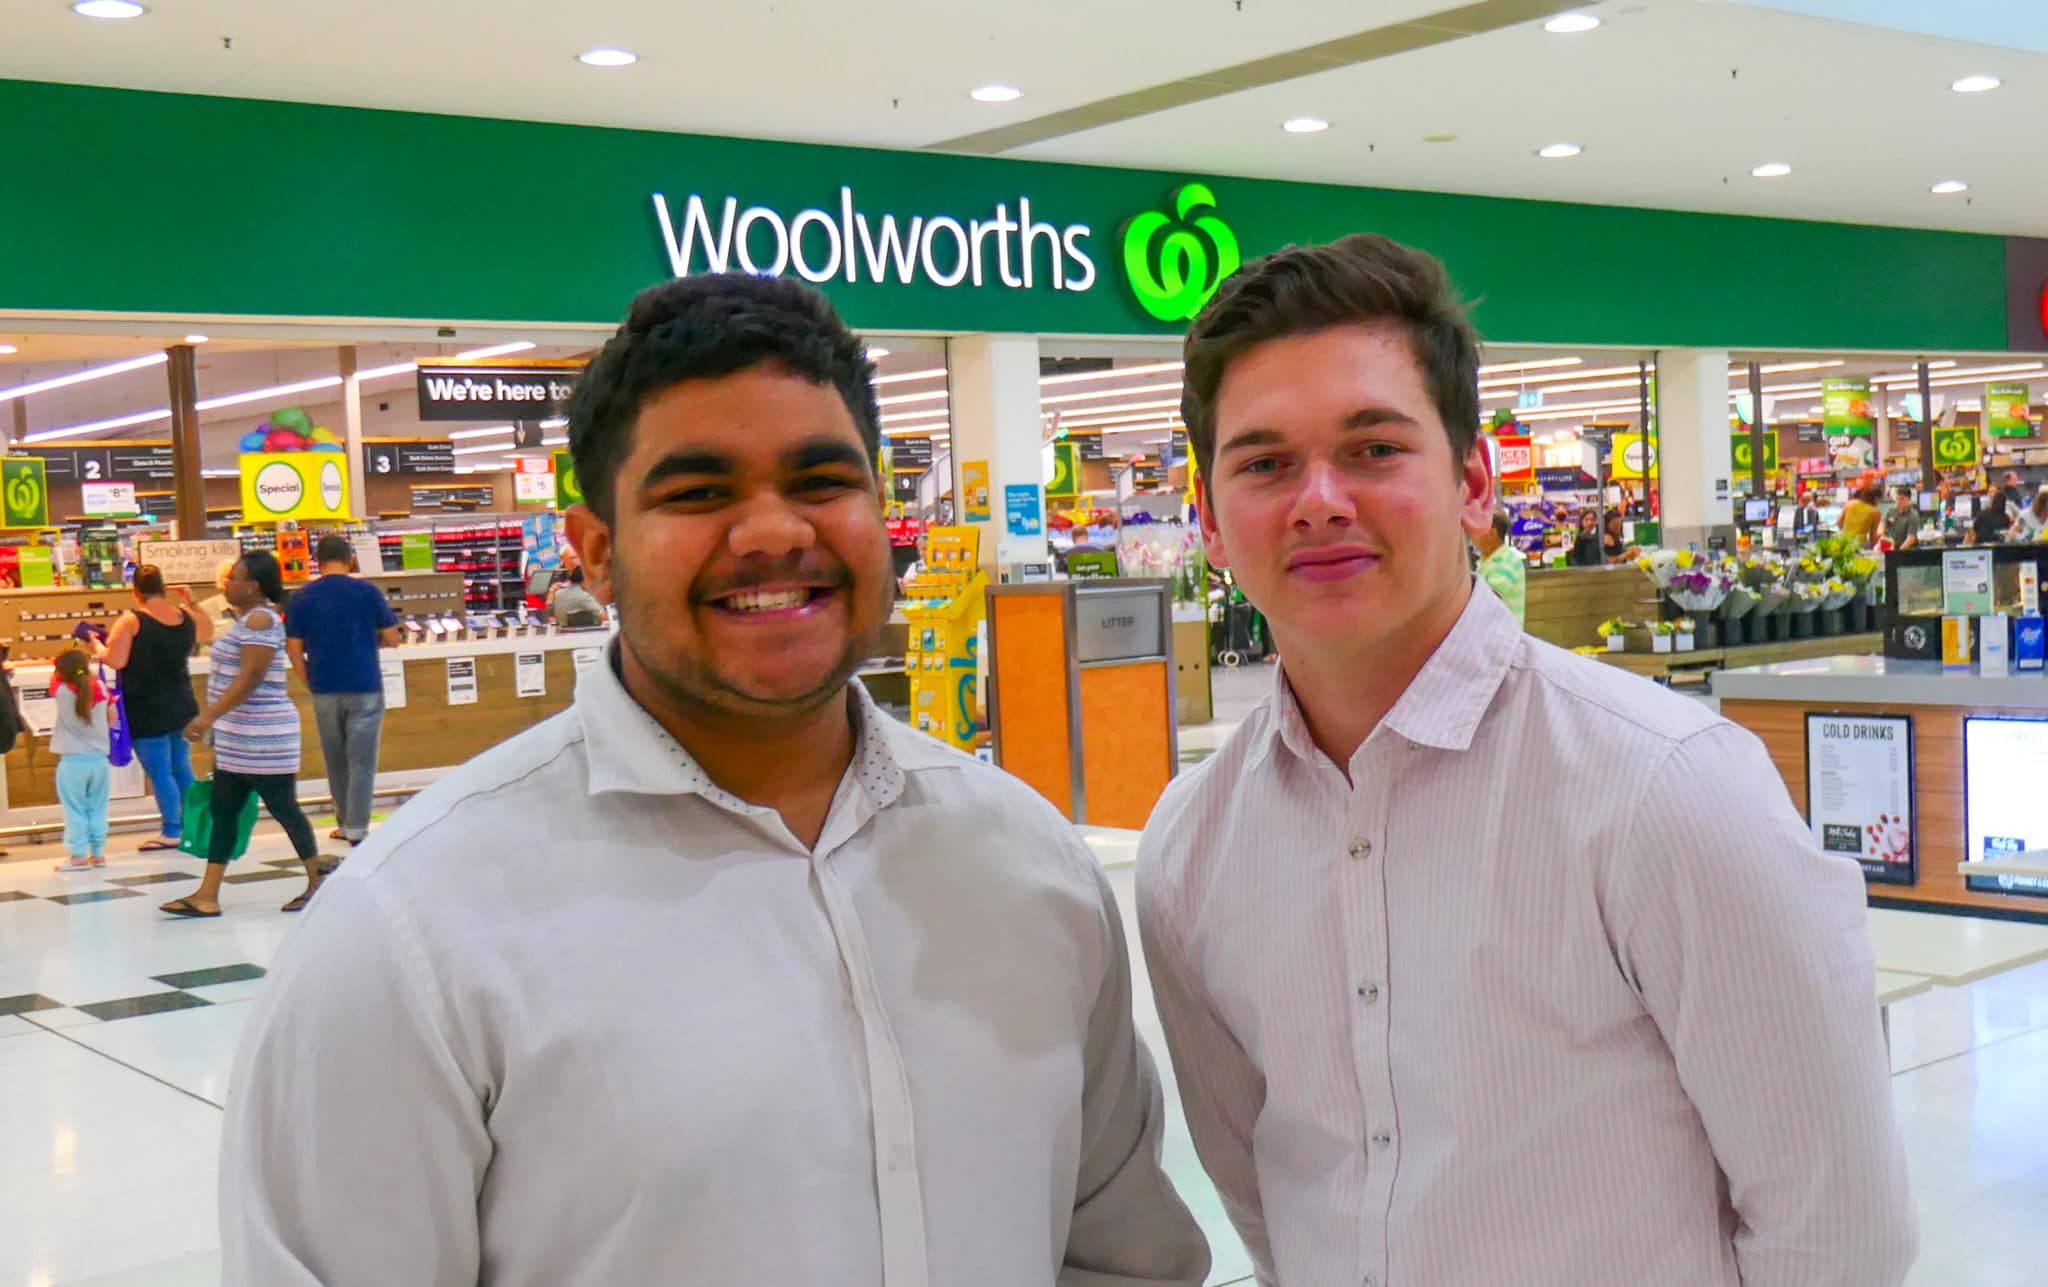 Discover Woolworths: A Retail Giant with Exciting Career Opportunities Across Australia